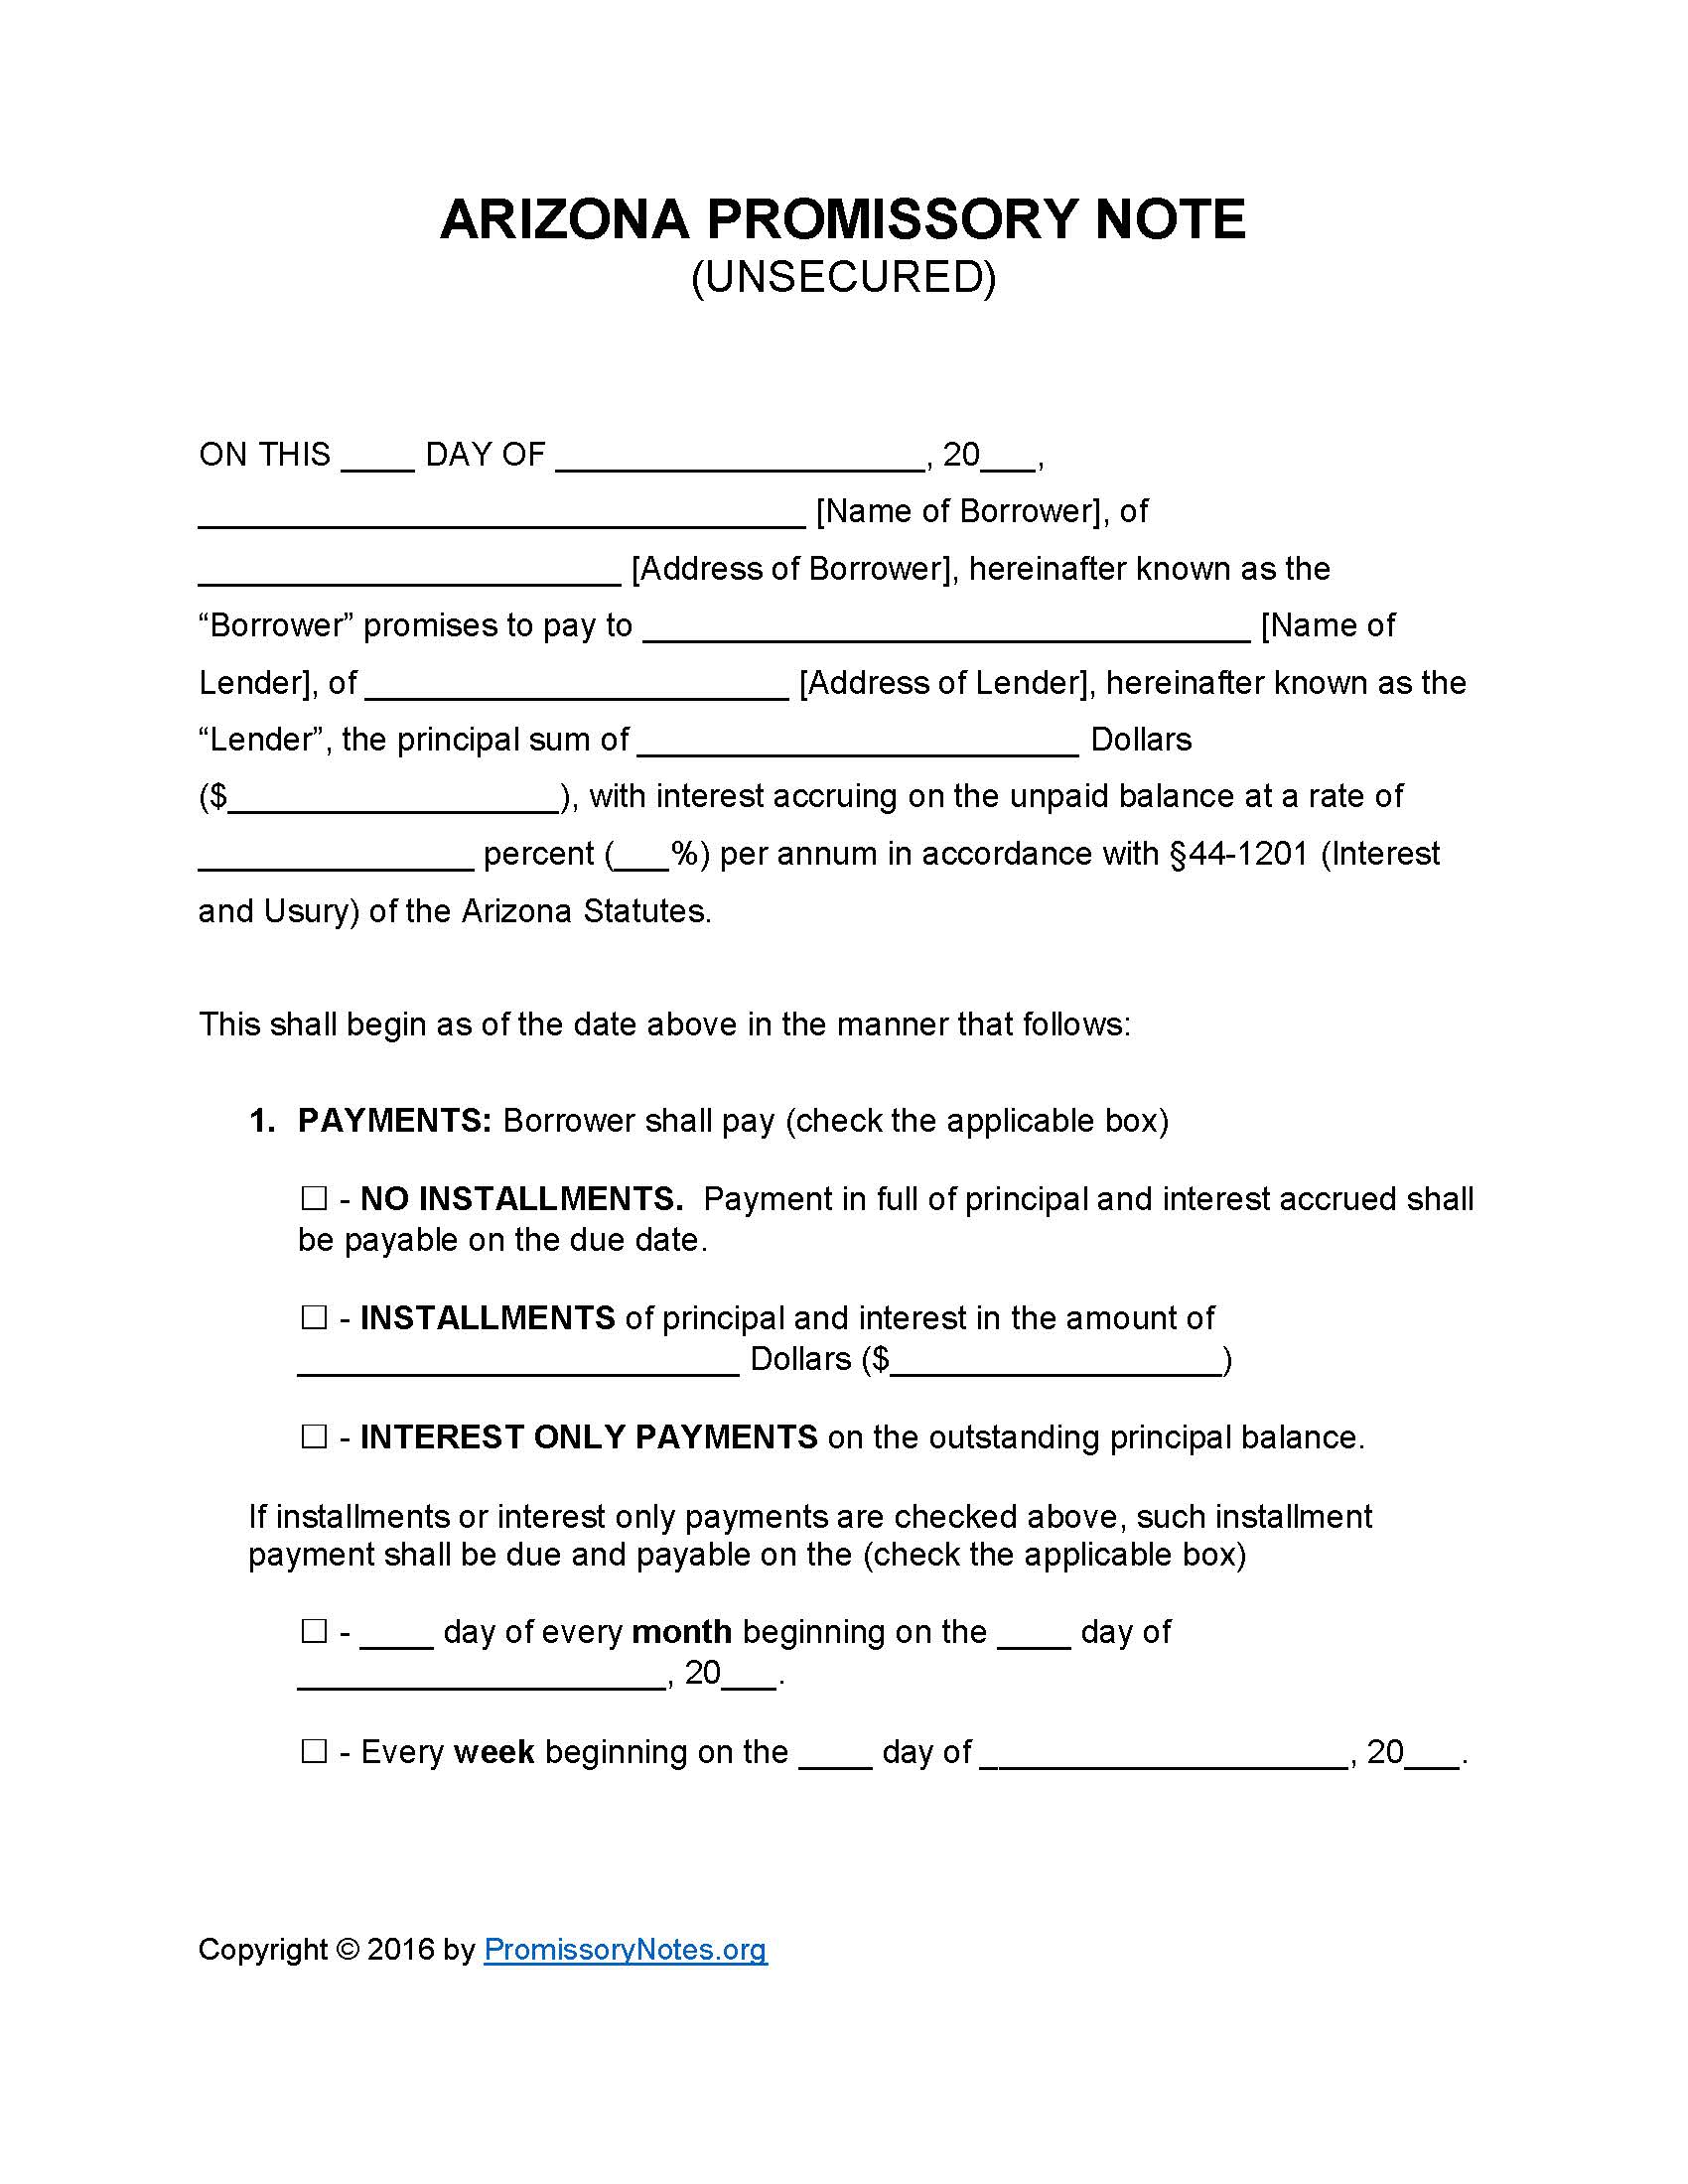 arizona-unsecured-promissory-note-form